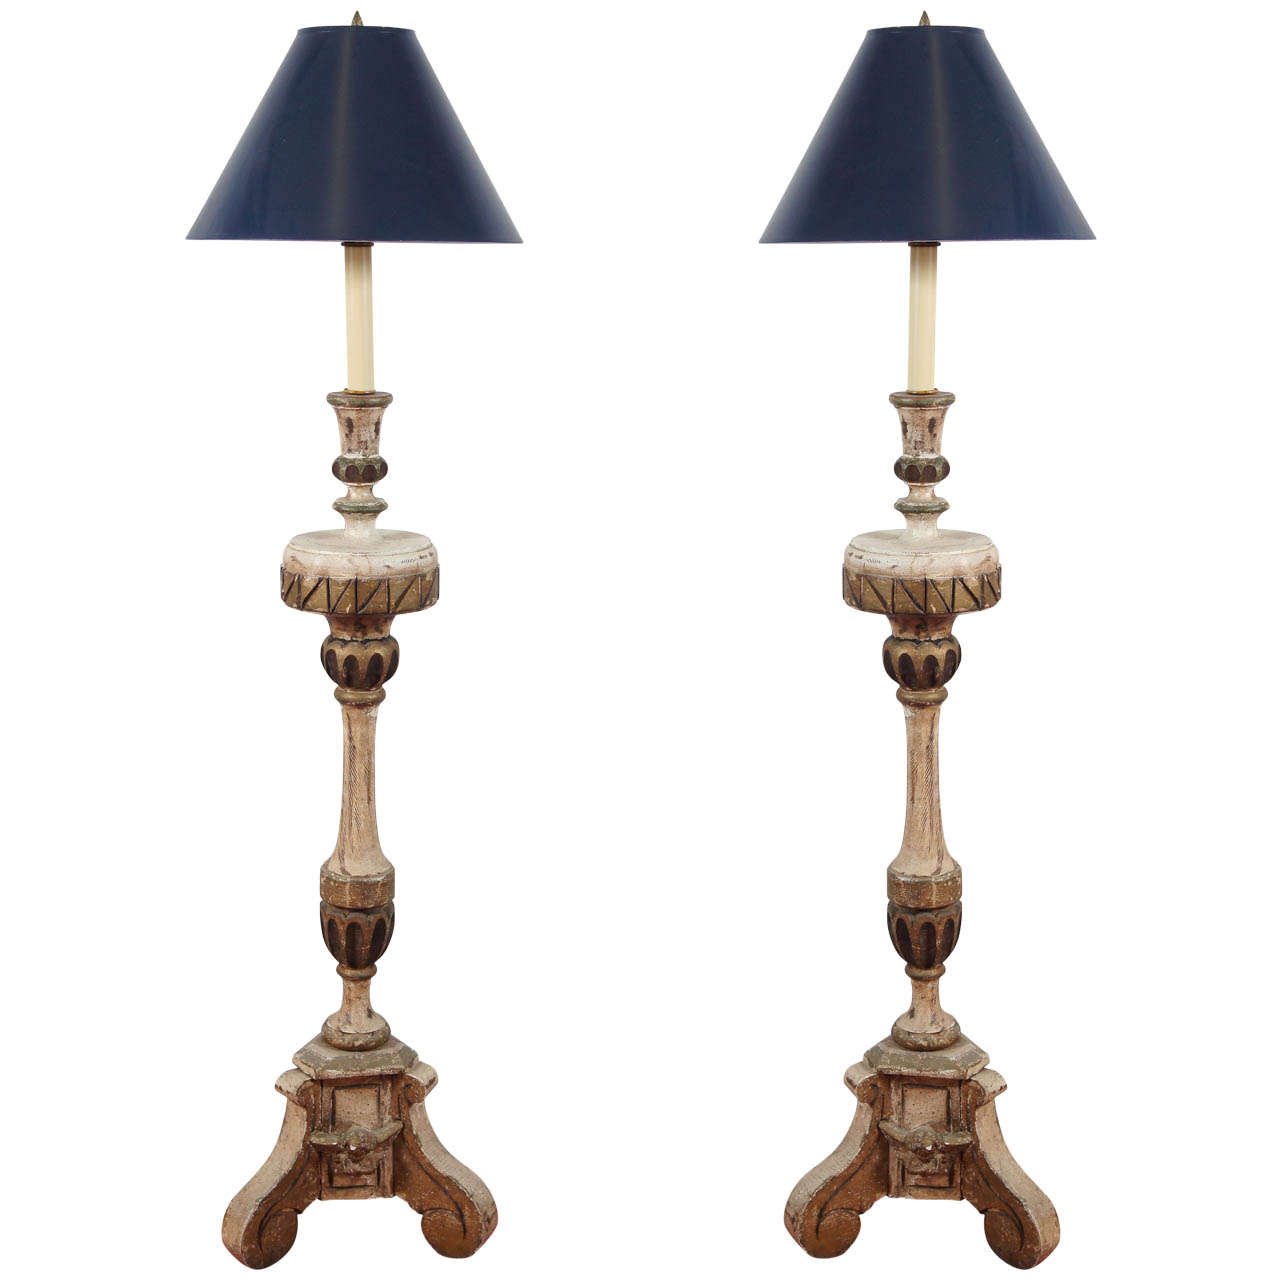 19th C. or Earlier Italian Gilt/Painted Wood Candlestick Floor Lamps/Pair